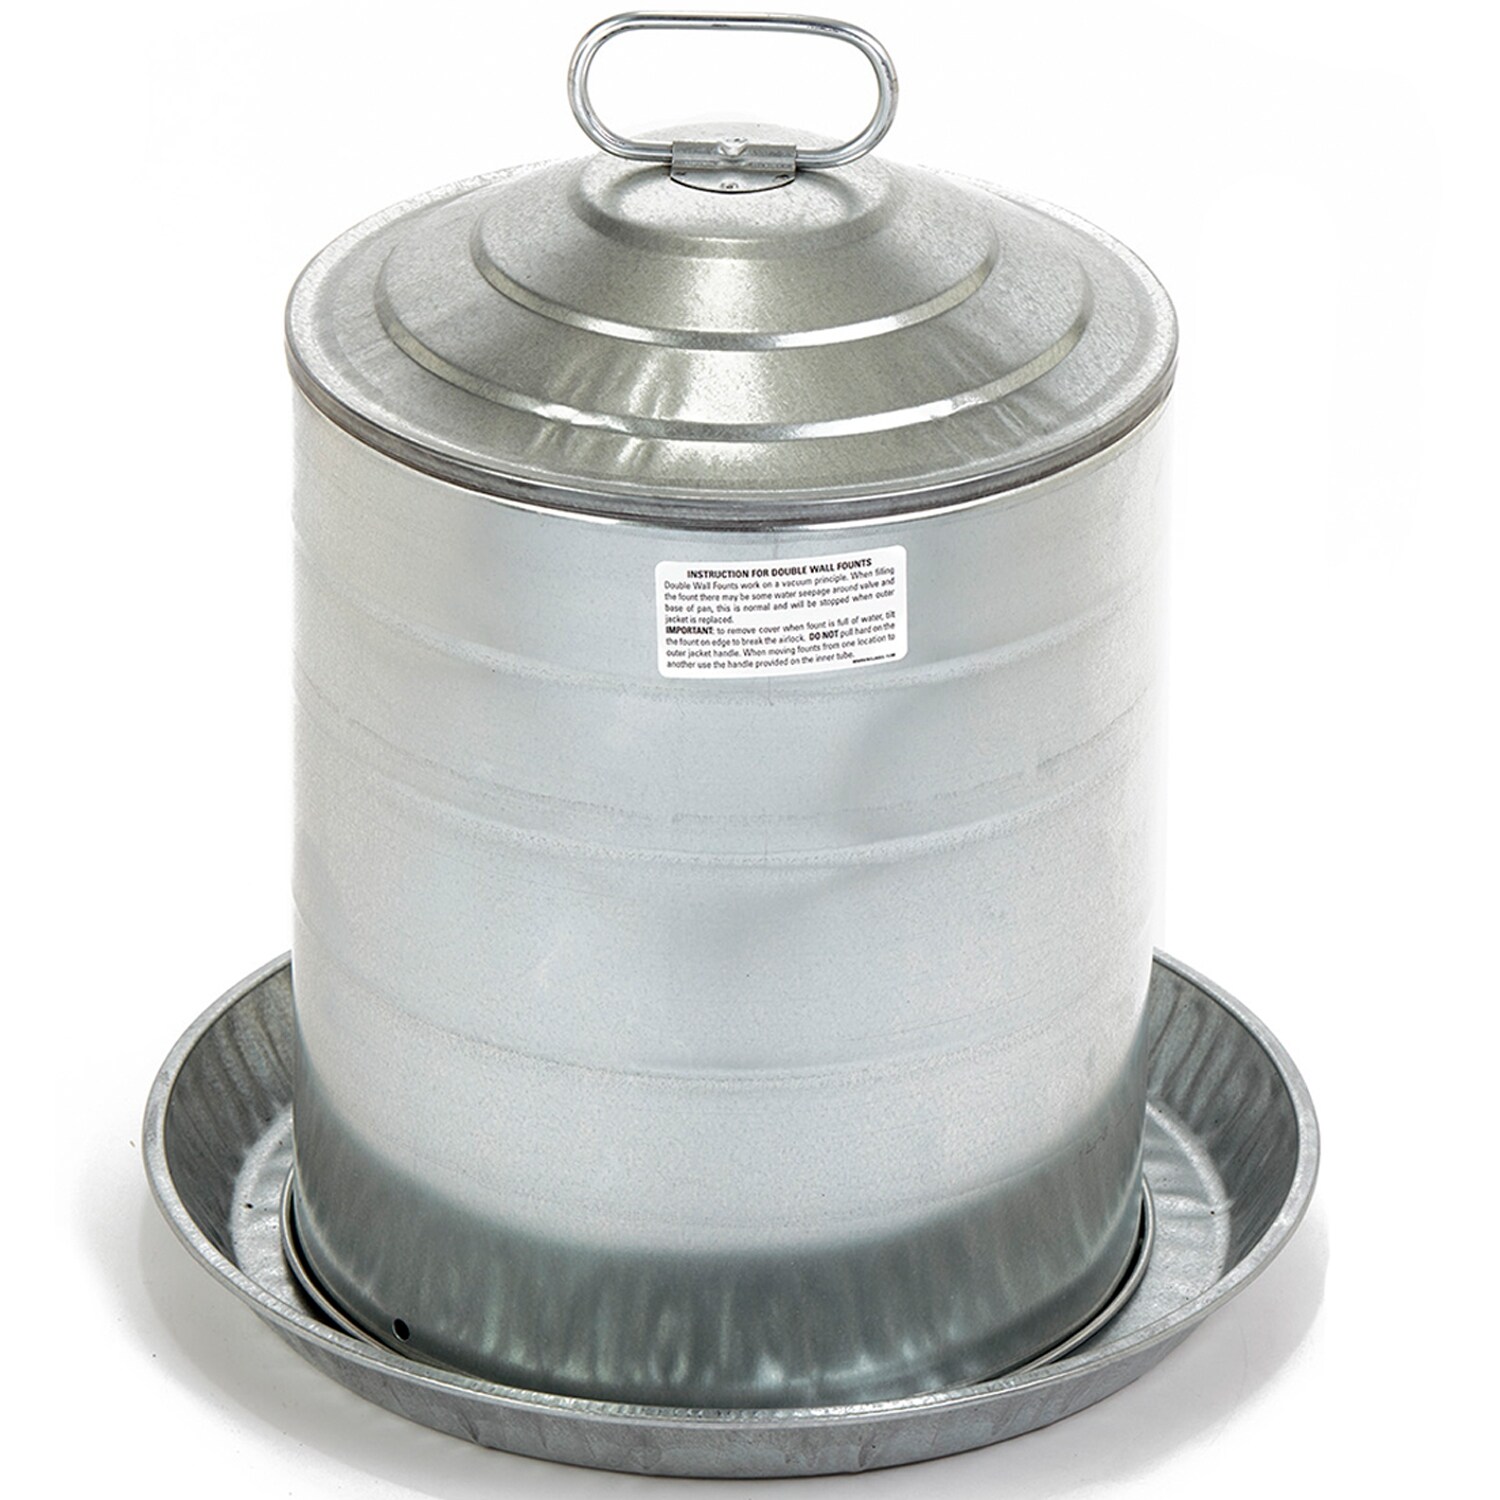 https://ak1.ostkcdn.com/images/products/is/images/direct/135cf36aefdadcc051c507c8562f652d0bd13e38/Miller-Manufacturing-5-Gallon-Double-Wall-Metal-Poultry-Fount-Automatic-Waterer.jpg